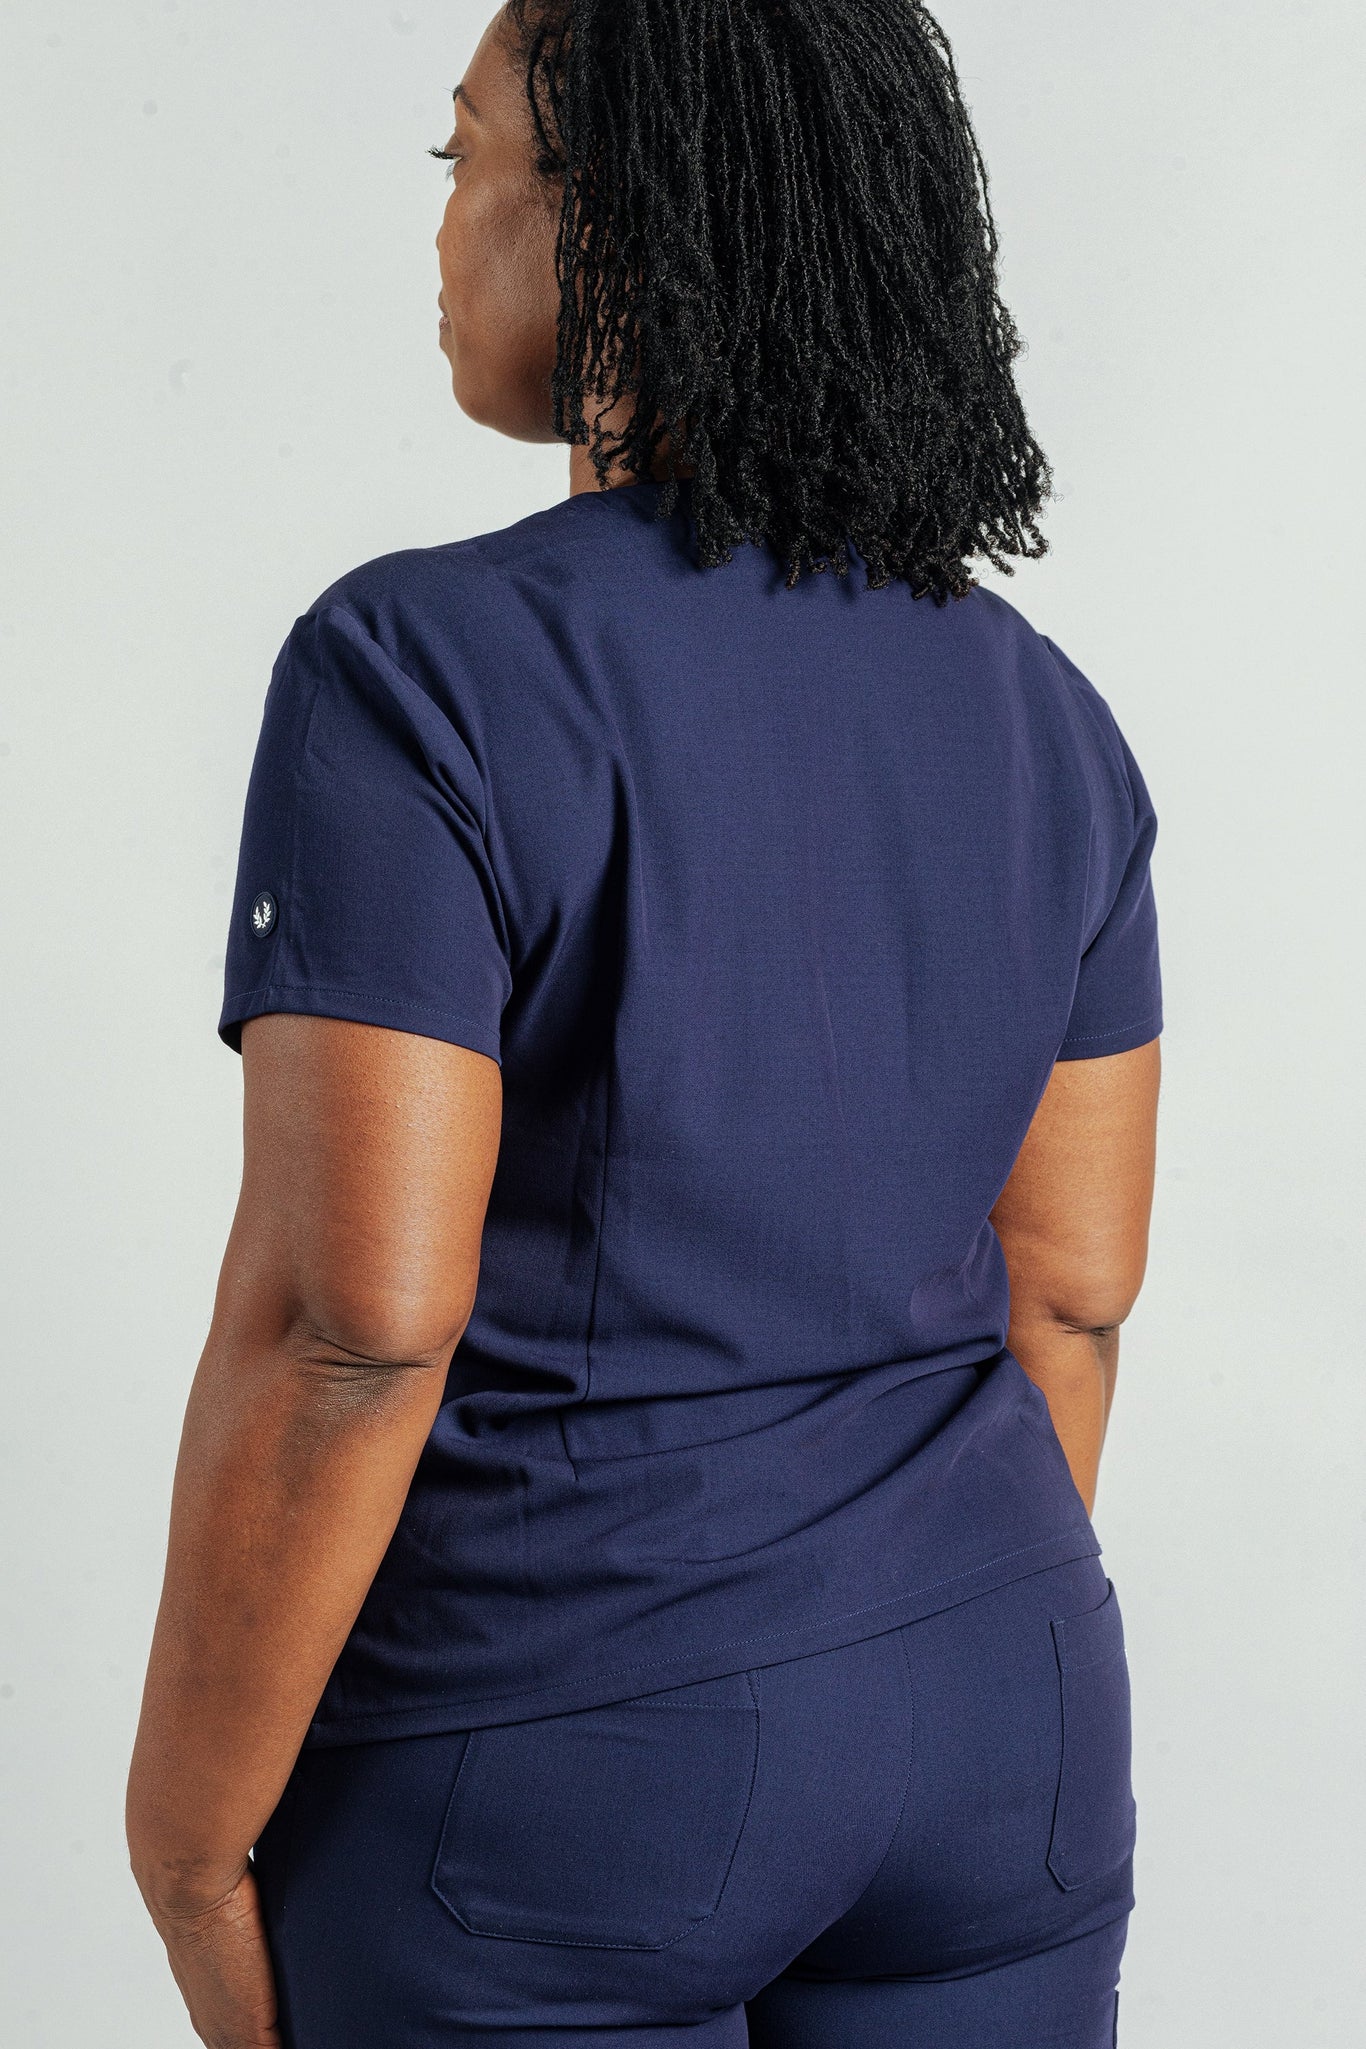 Apollo Scrubs - Hers - The Utility Tops for women, antimicrobial, V-Neck shirt